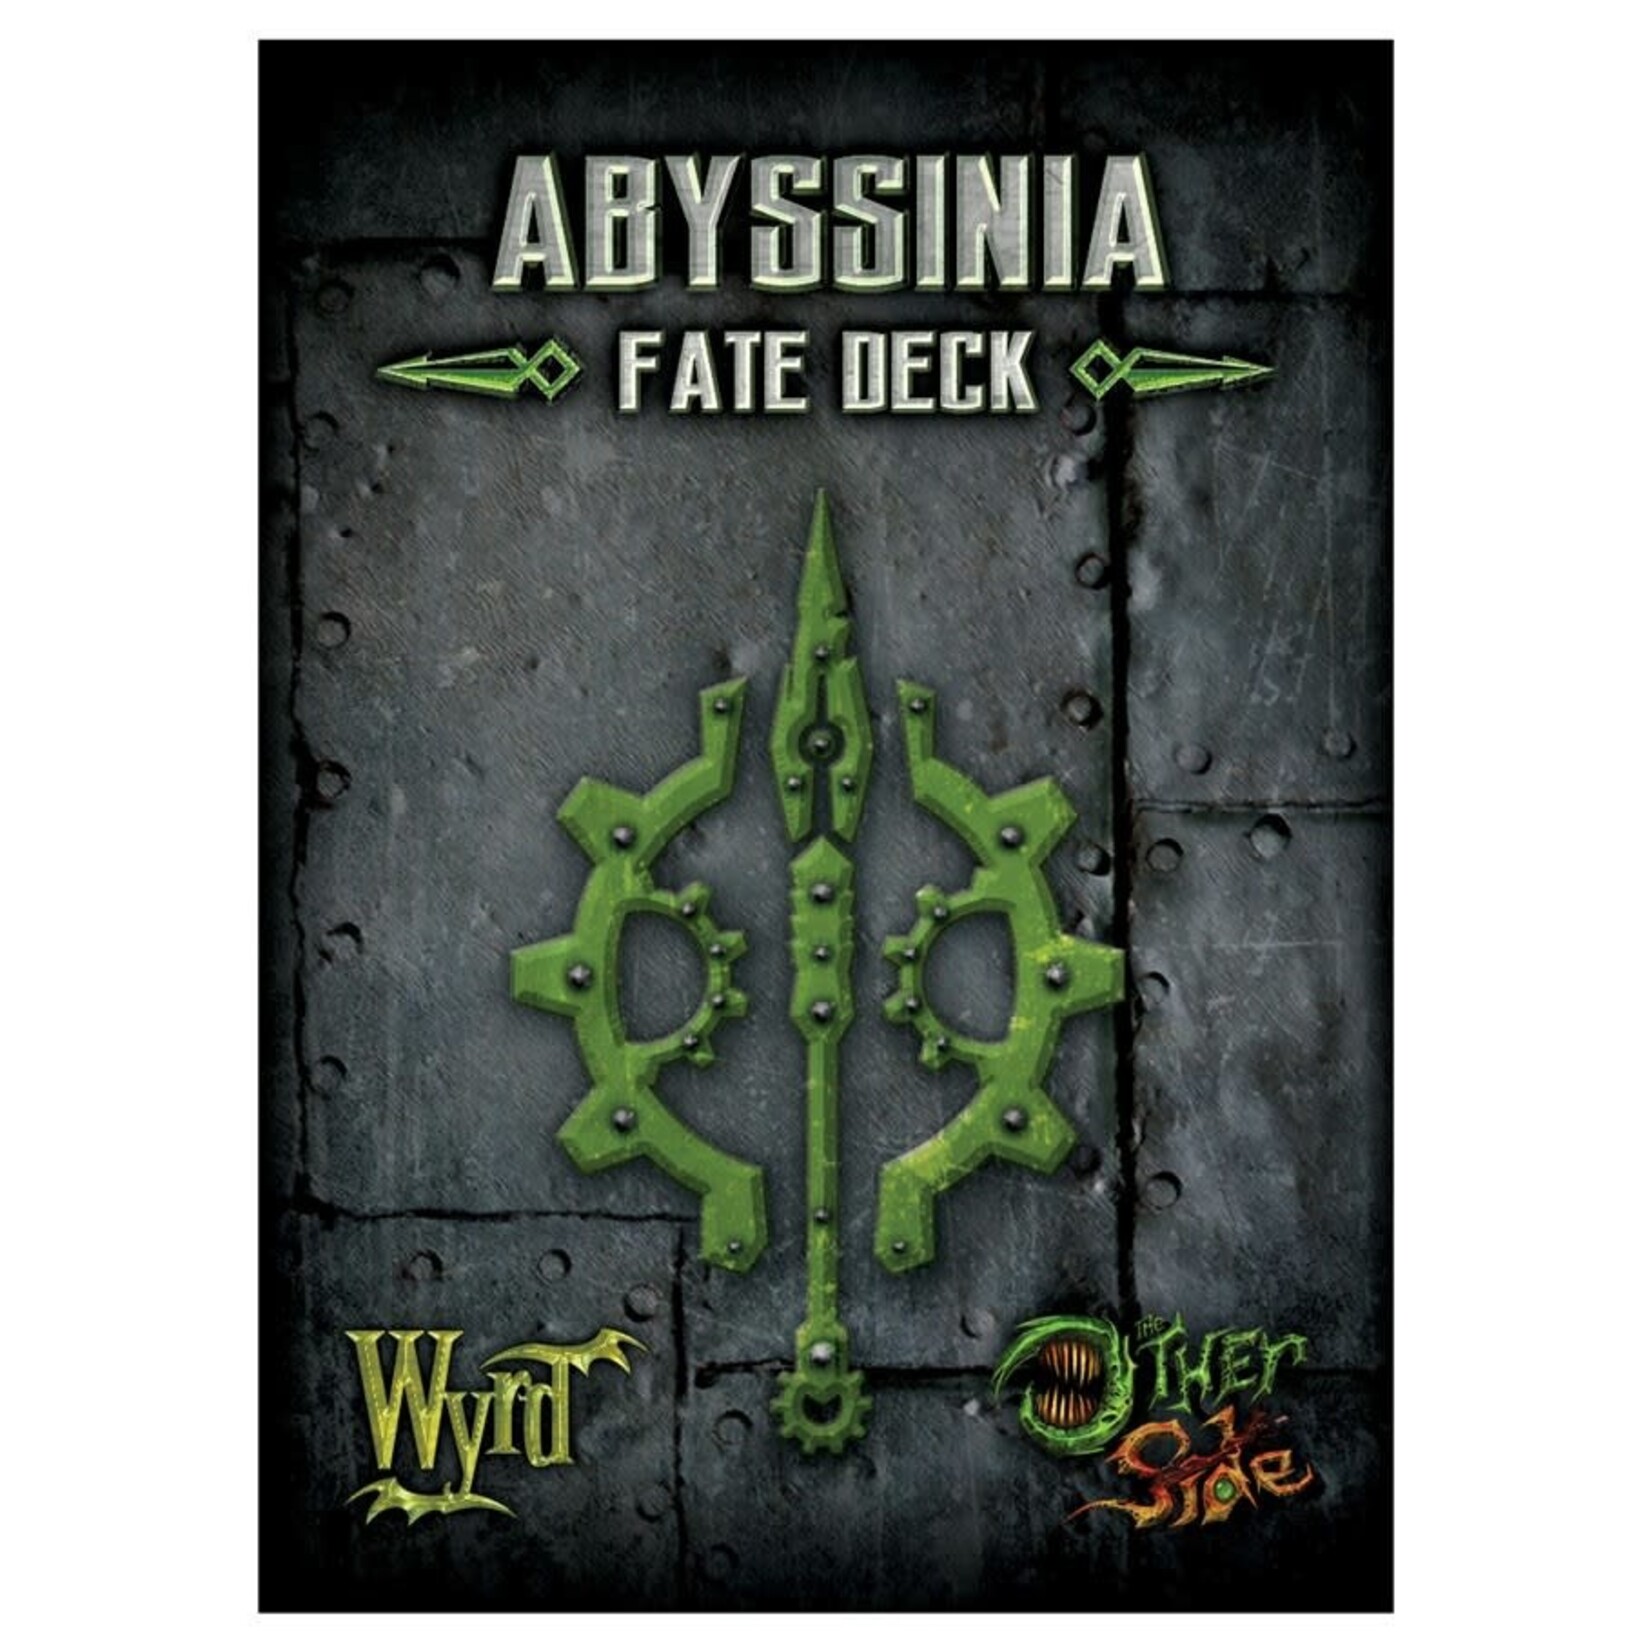 The Other Side: Abyssinia Fate Deck (Plastic)